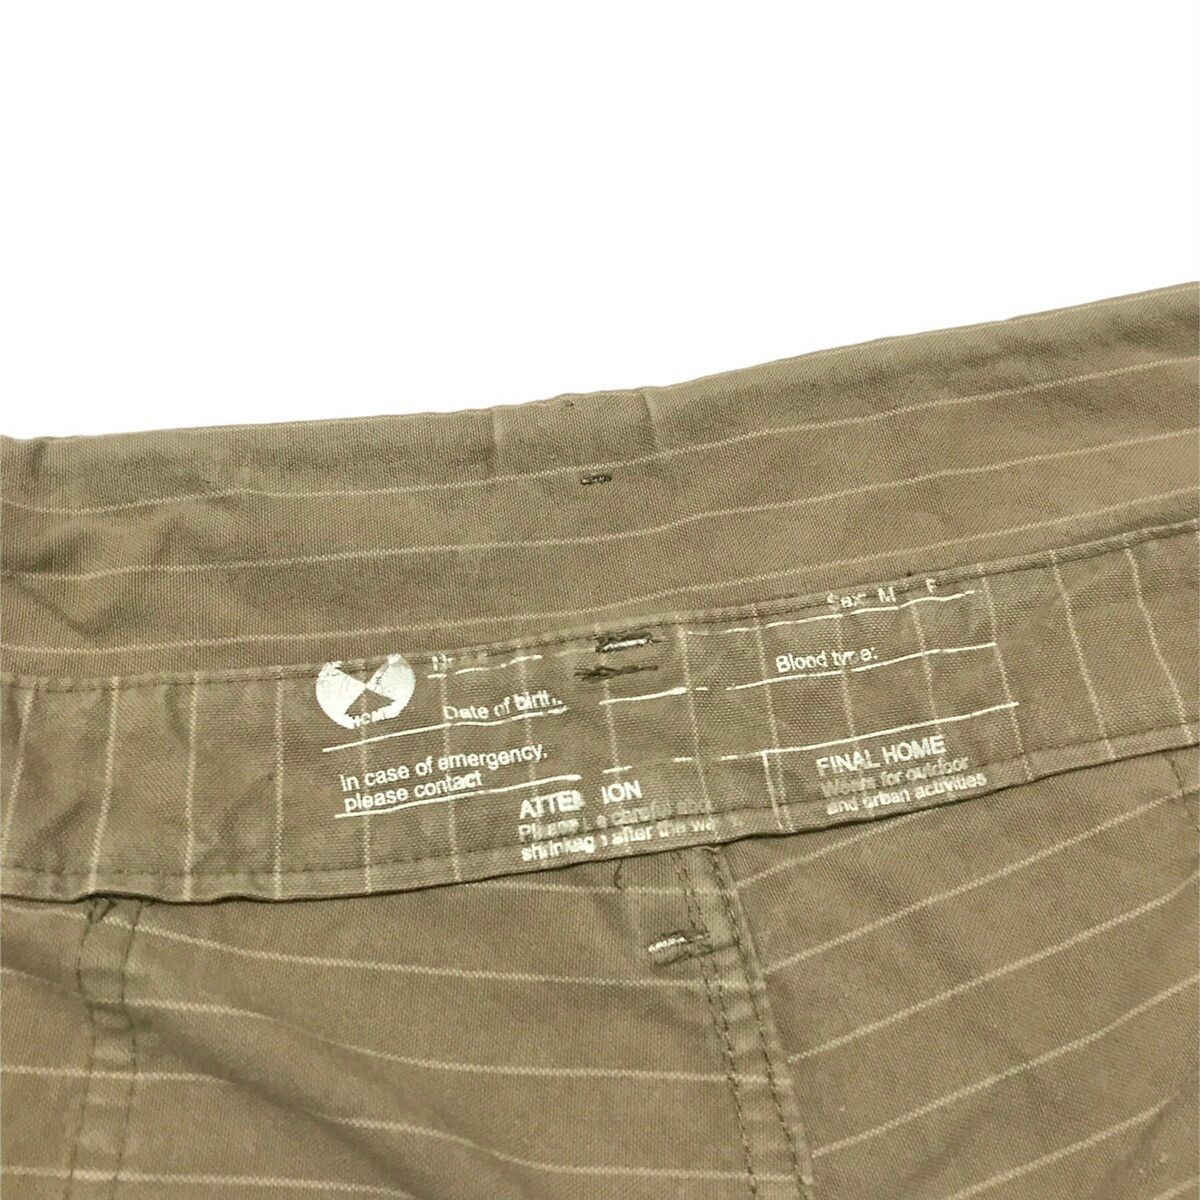 Final Home Military trouser pants - 3